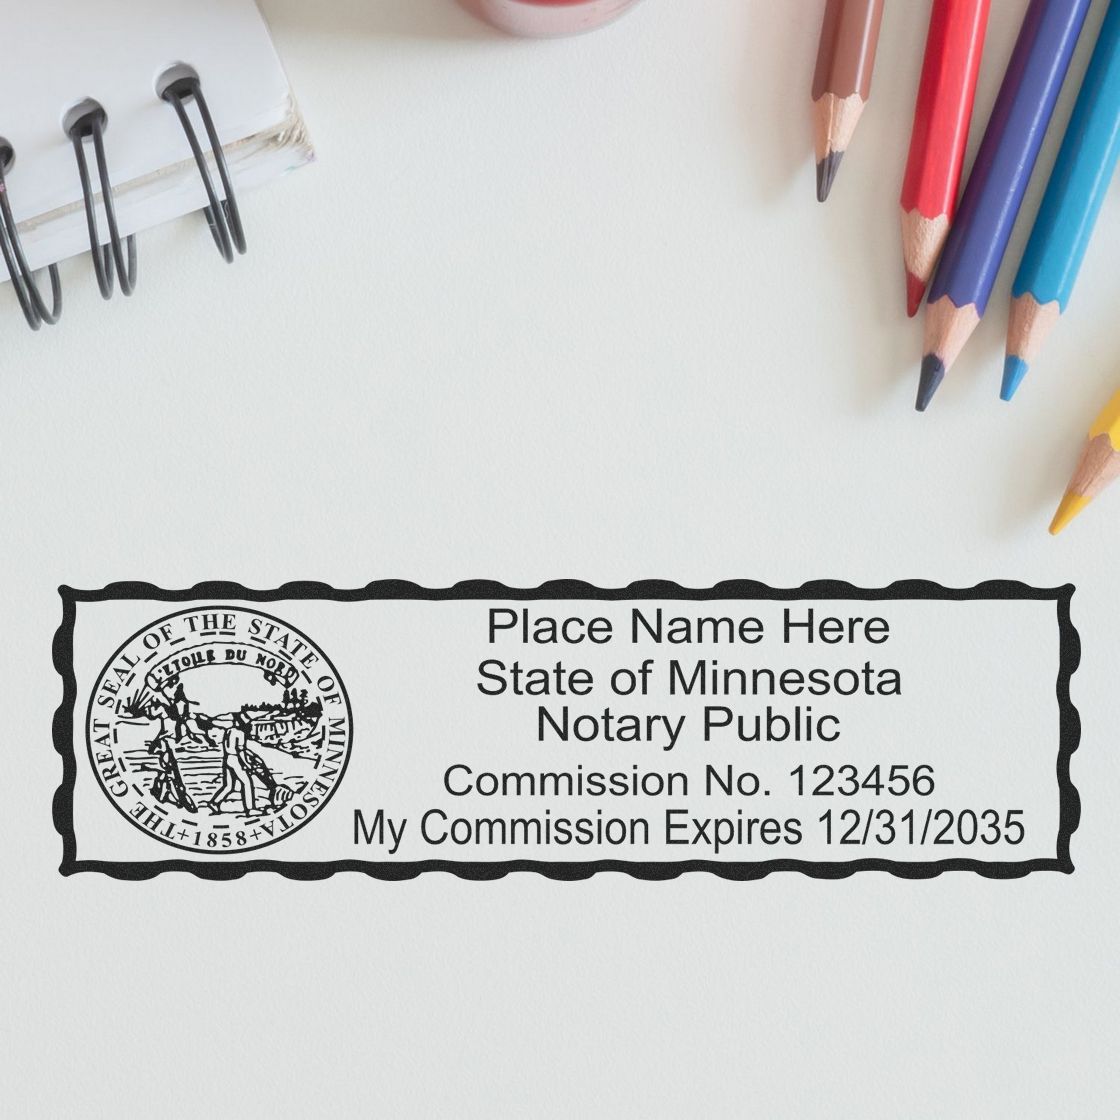 The Super Slim Minnesota Notary Public Stamp stamp impression comes to life with a crisp, detailed photo on paper - showcasing true professional quality.